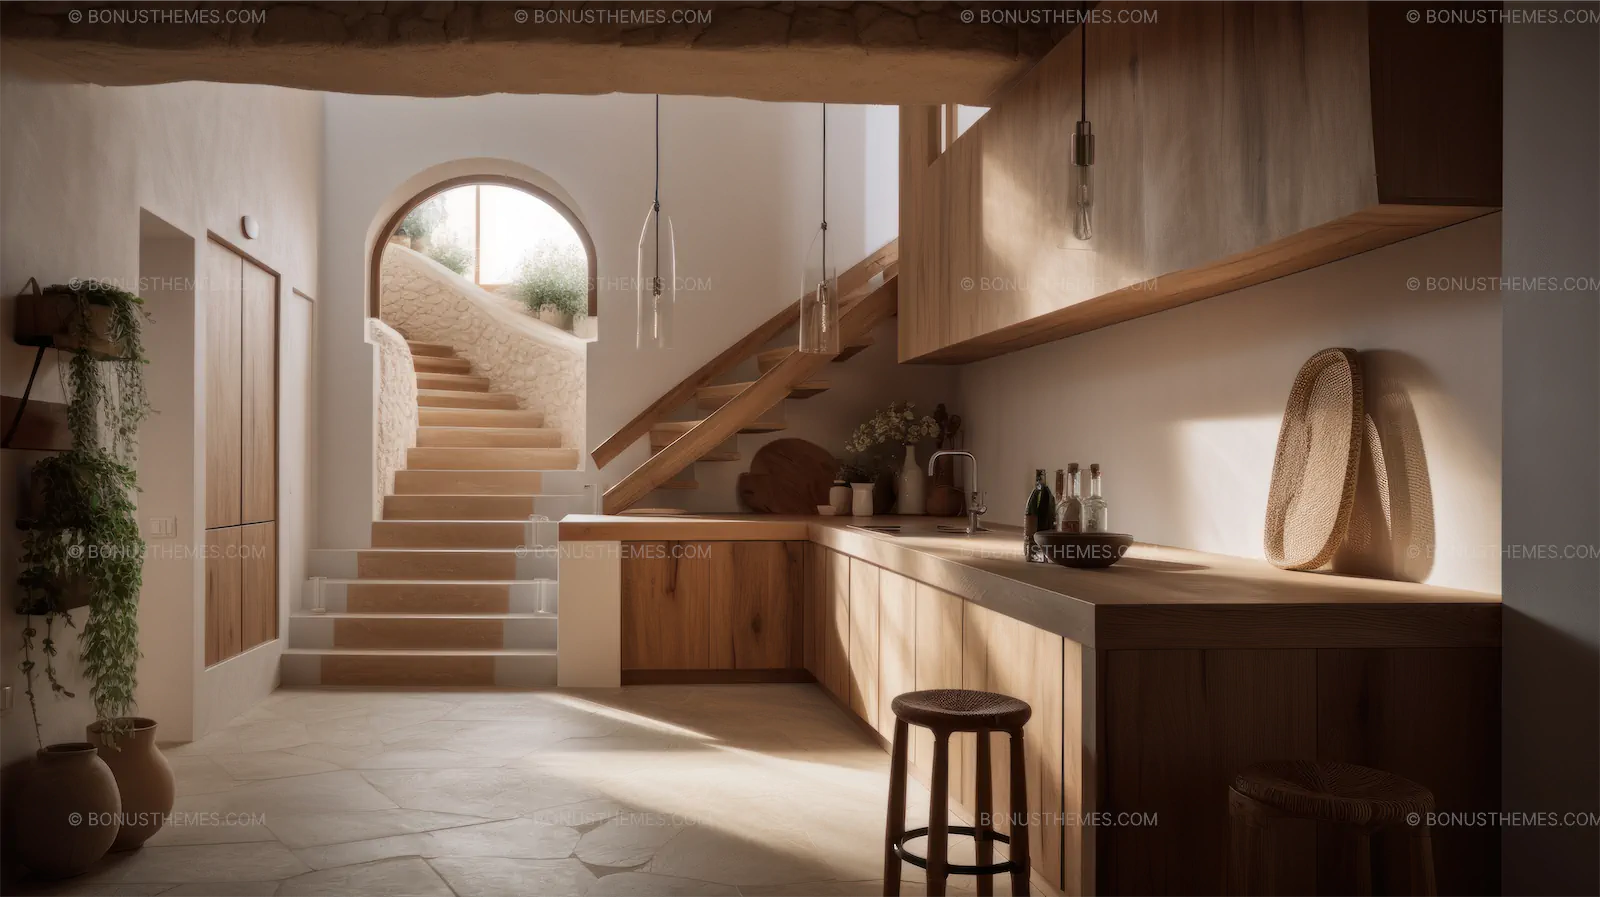 Cycladic kitchen with natural materials like wood and stone